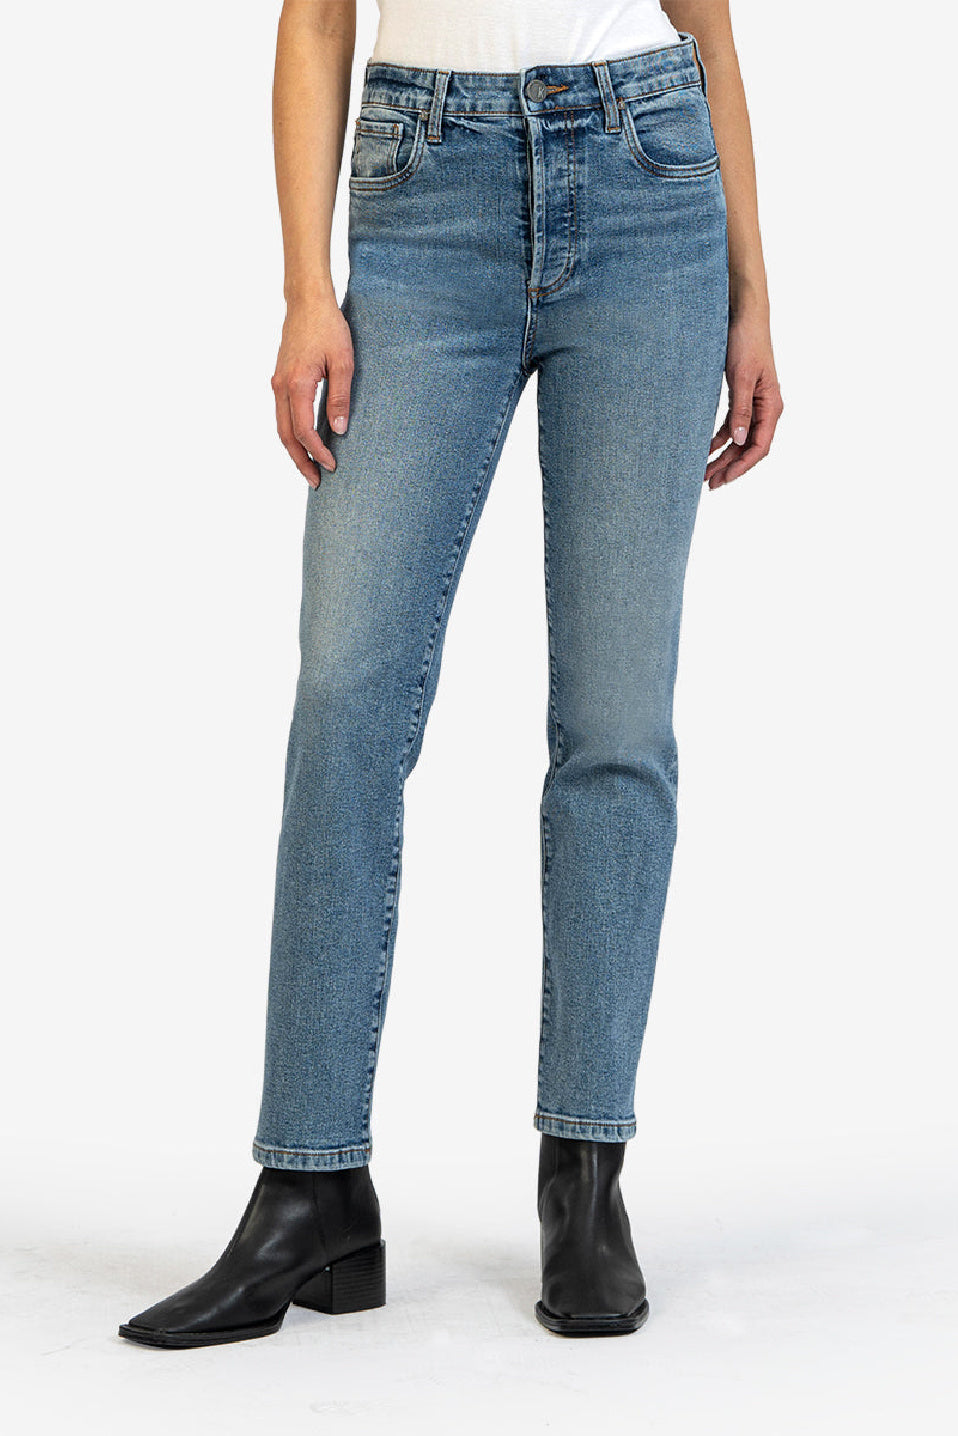 Kut From The Kloth Rosa High Rise Ankle Straight Vintage Jeans (Dance Wash)